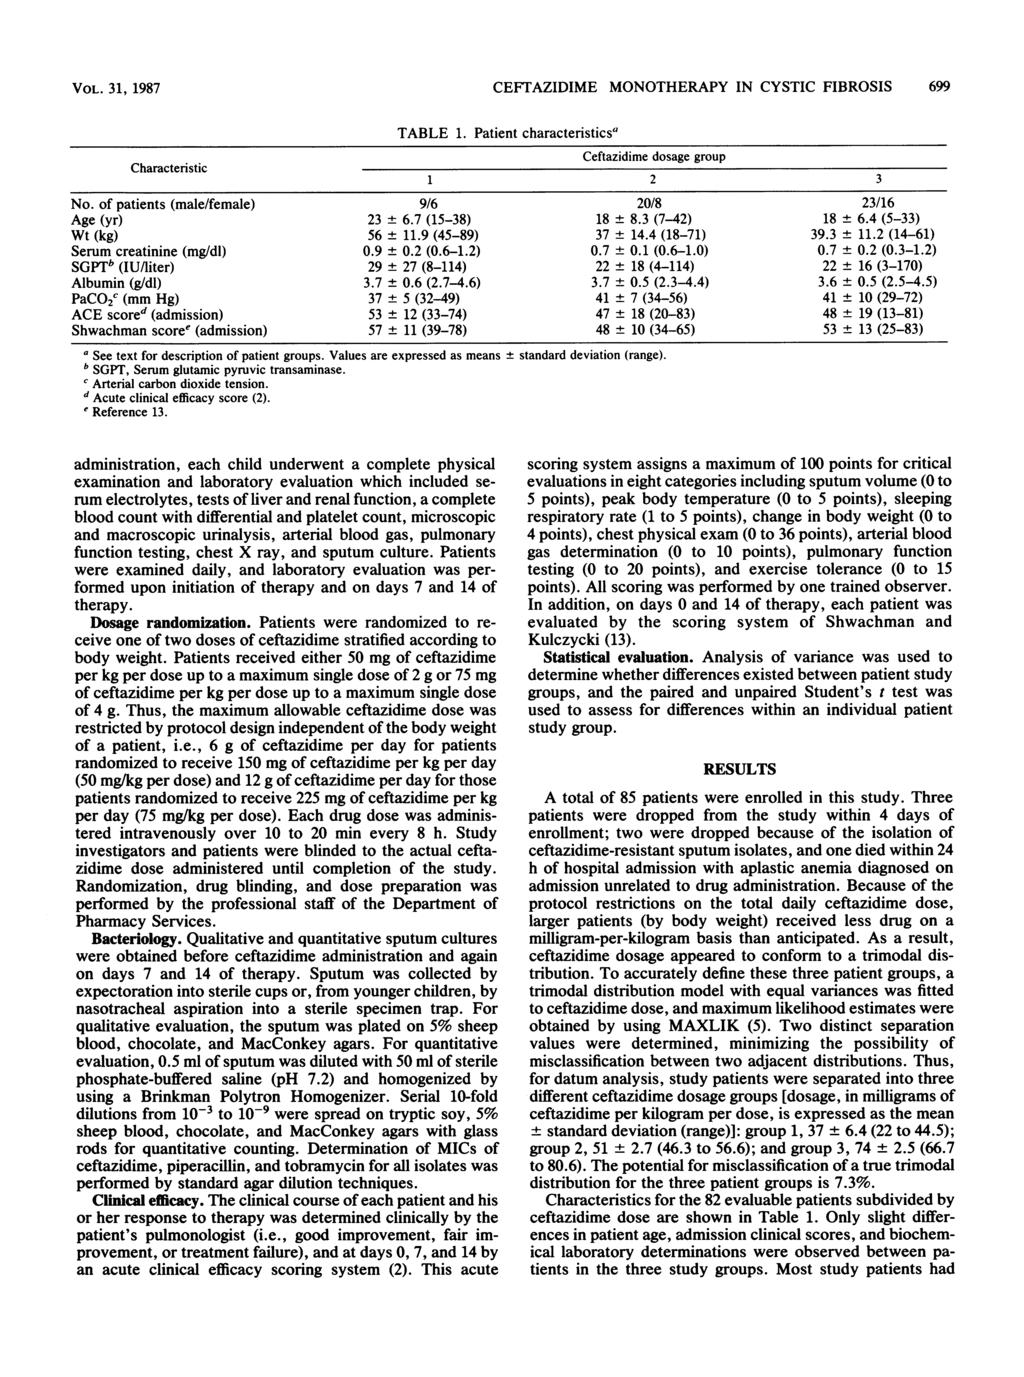 VOL. 31, 1987 CEFTAZIDIME MONOTHERAPY IN CYSTIC FIBROSIS 699 TABLE 1. Patient characteristics' Ceftazidime dosage group Characteristic 1 2 3 No.